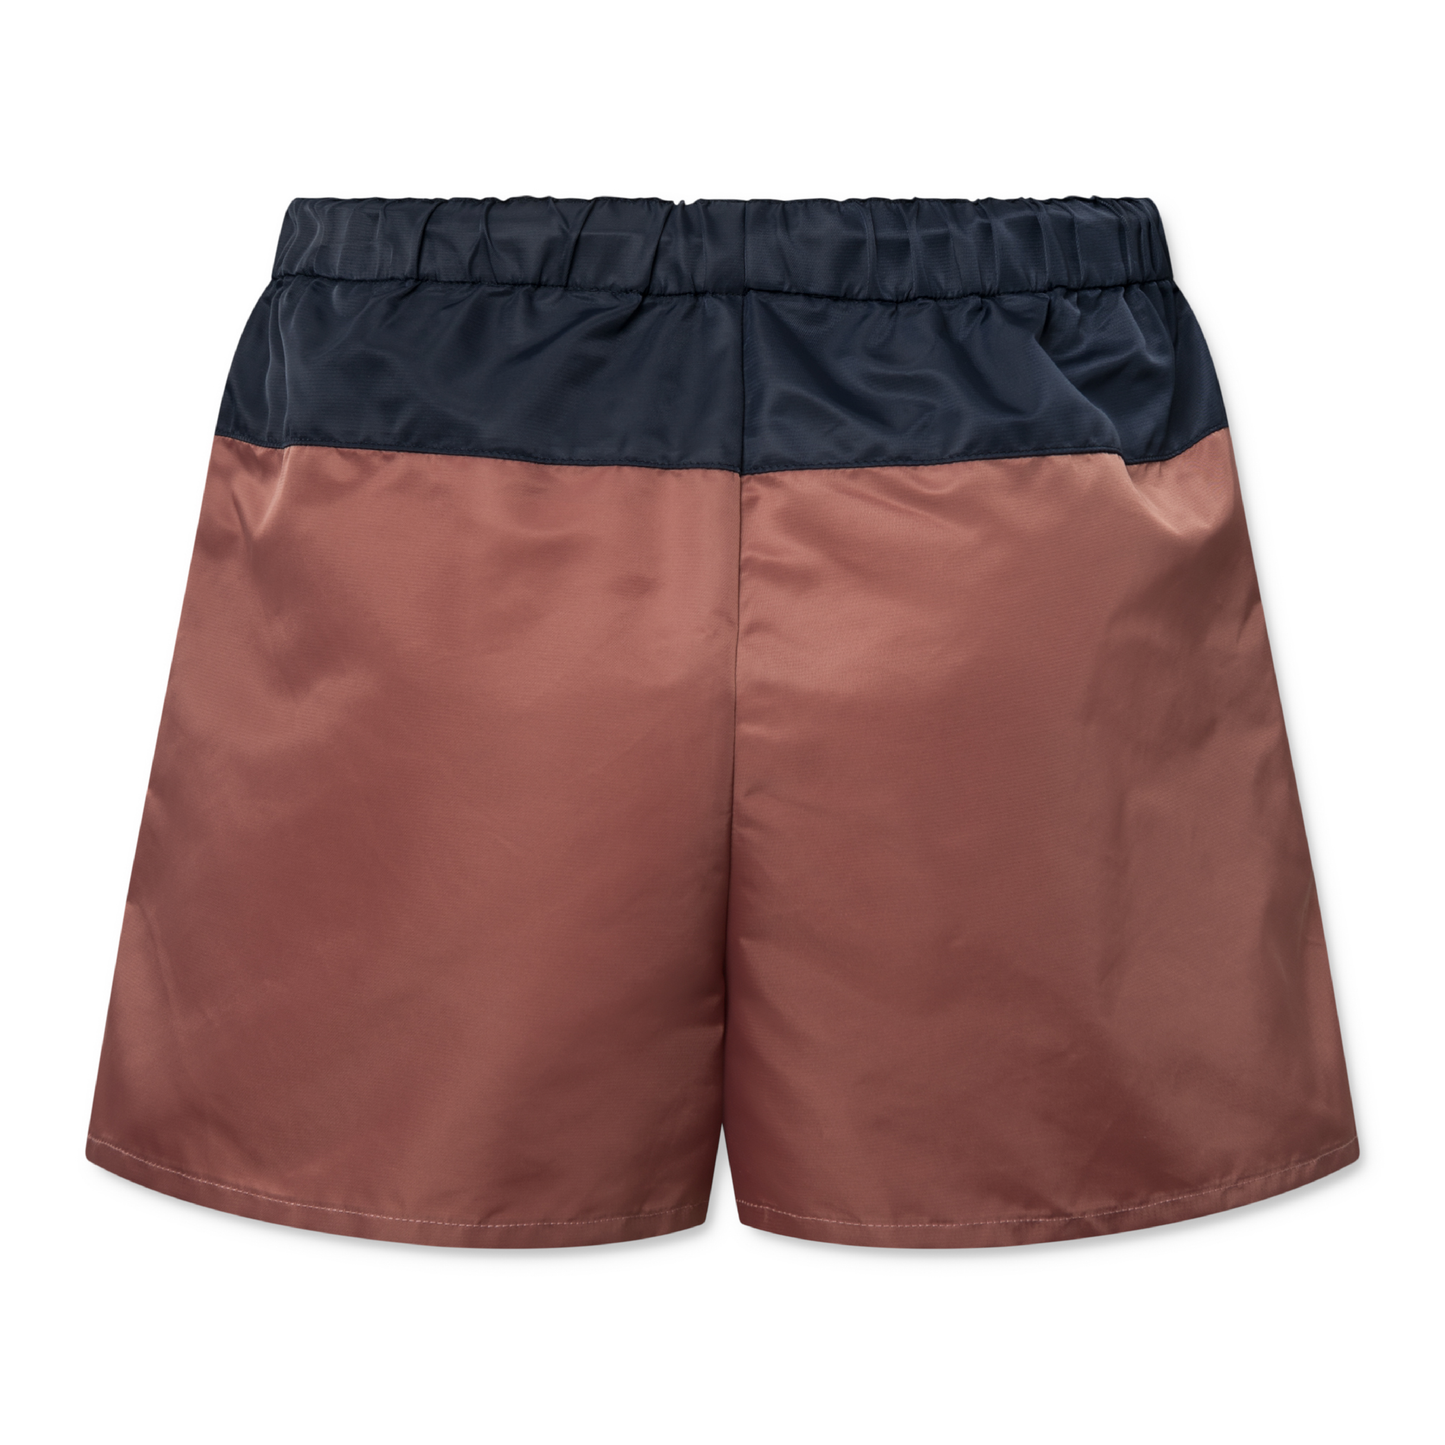 Alessio 2 Tone Shorts, Old Rose/Totale Eclipse